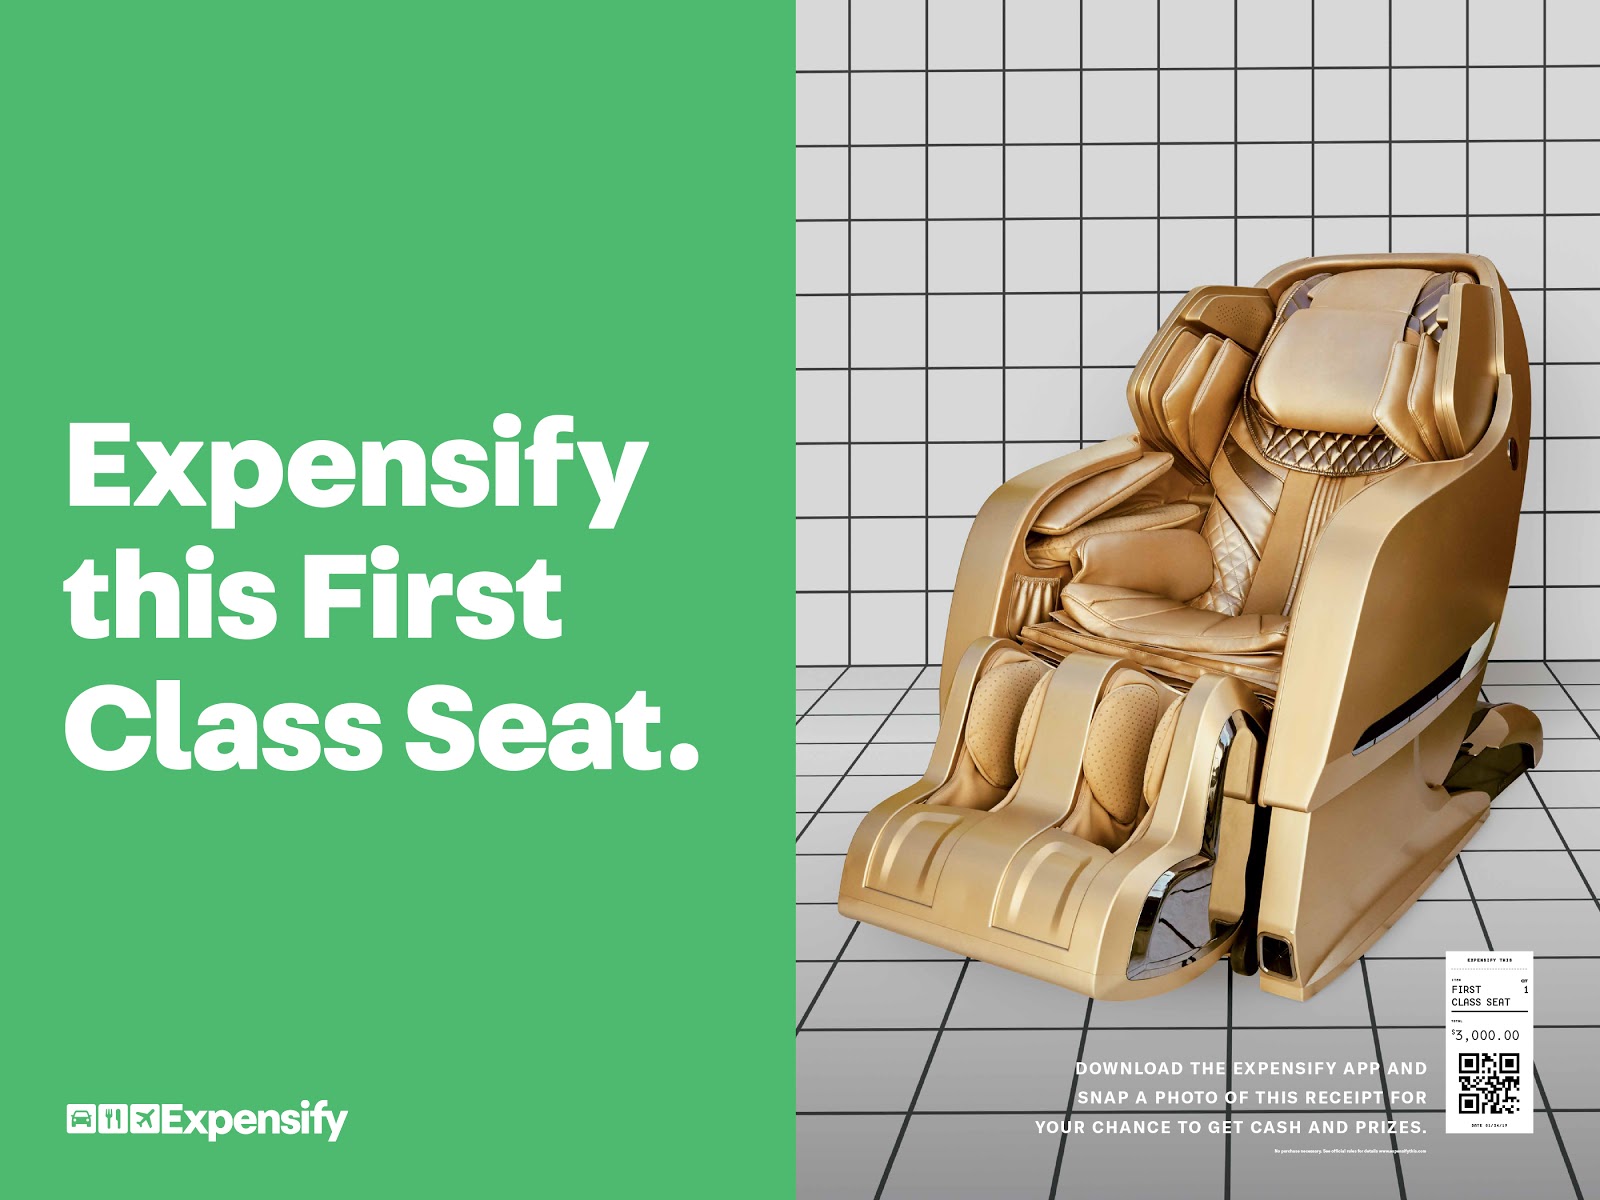 Expensify_Expensible_FirstClassSeat_24x36_r6.jpg